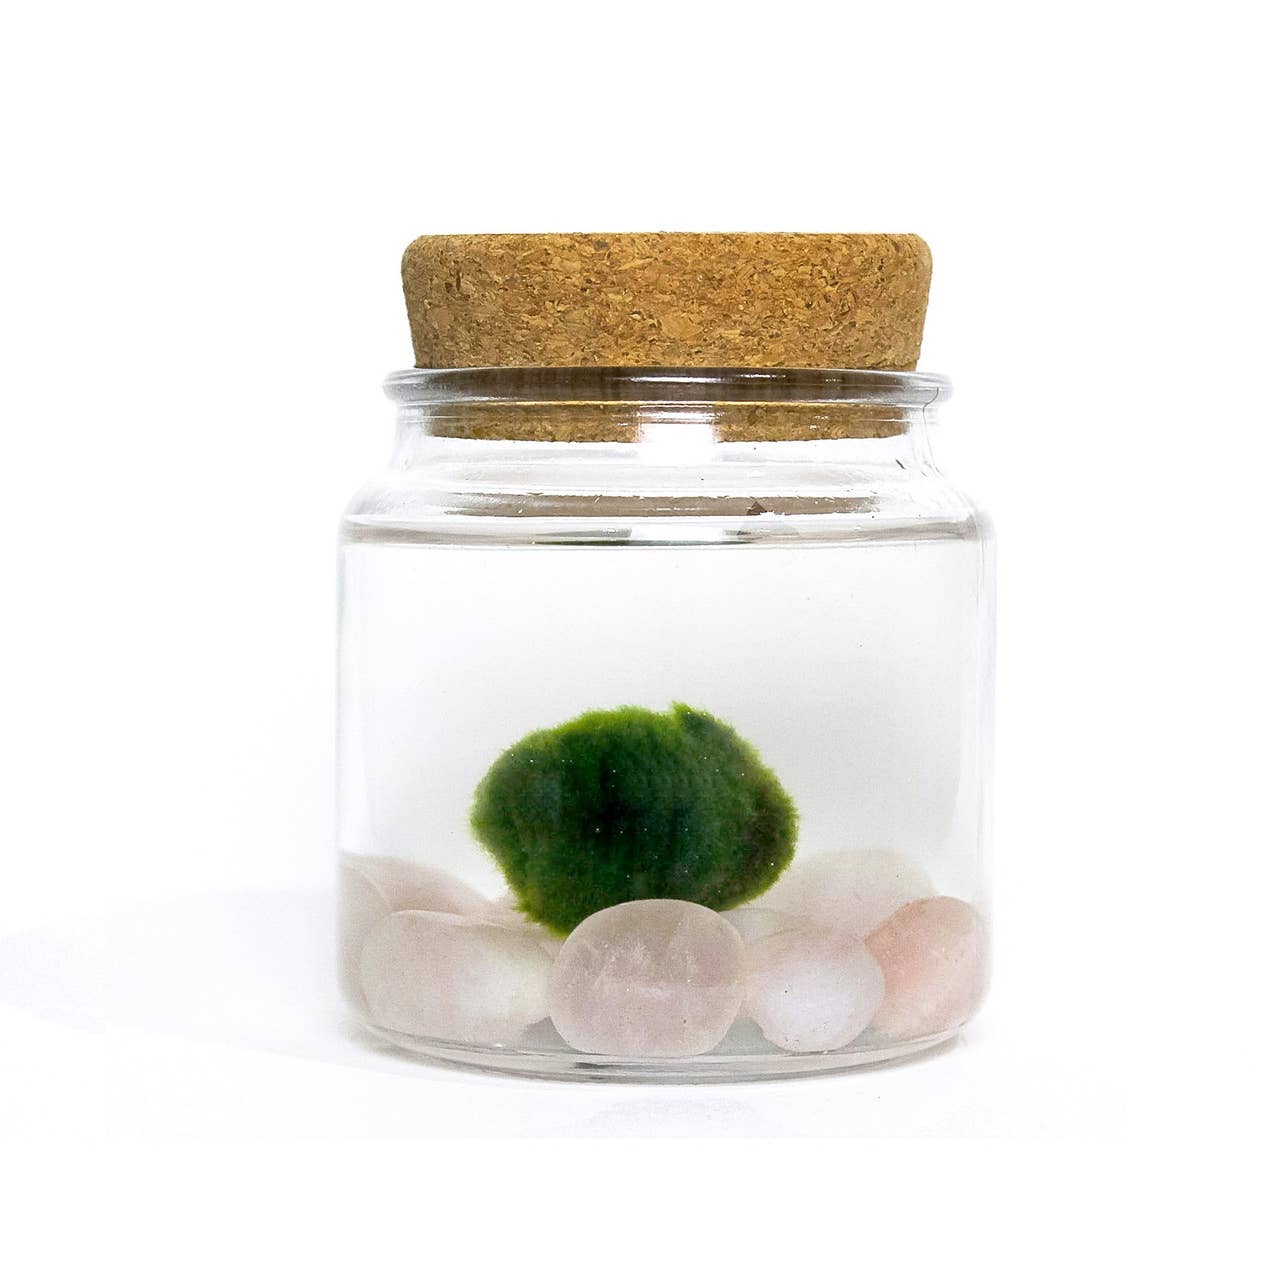 Shop Online Now  Feng Sway LIVE PLANTS Japanese Marimo Moss Ball